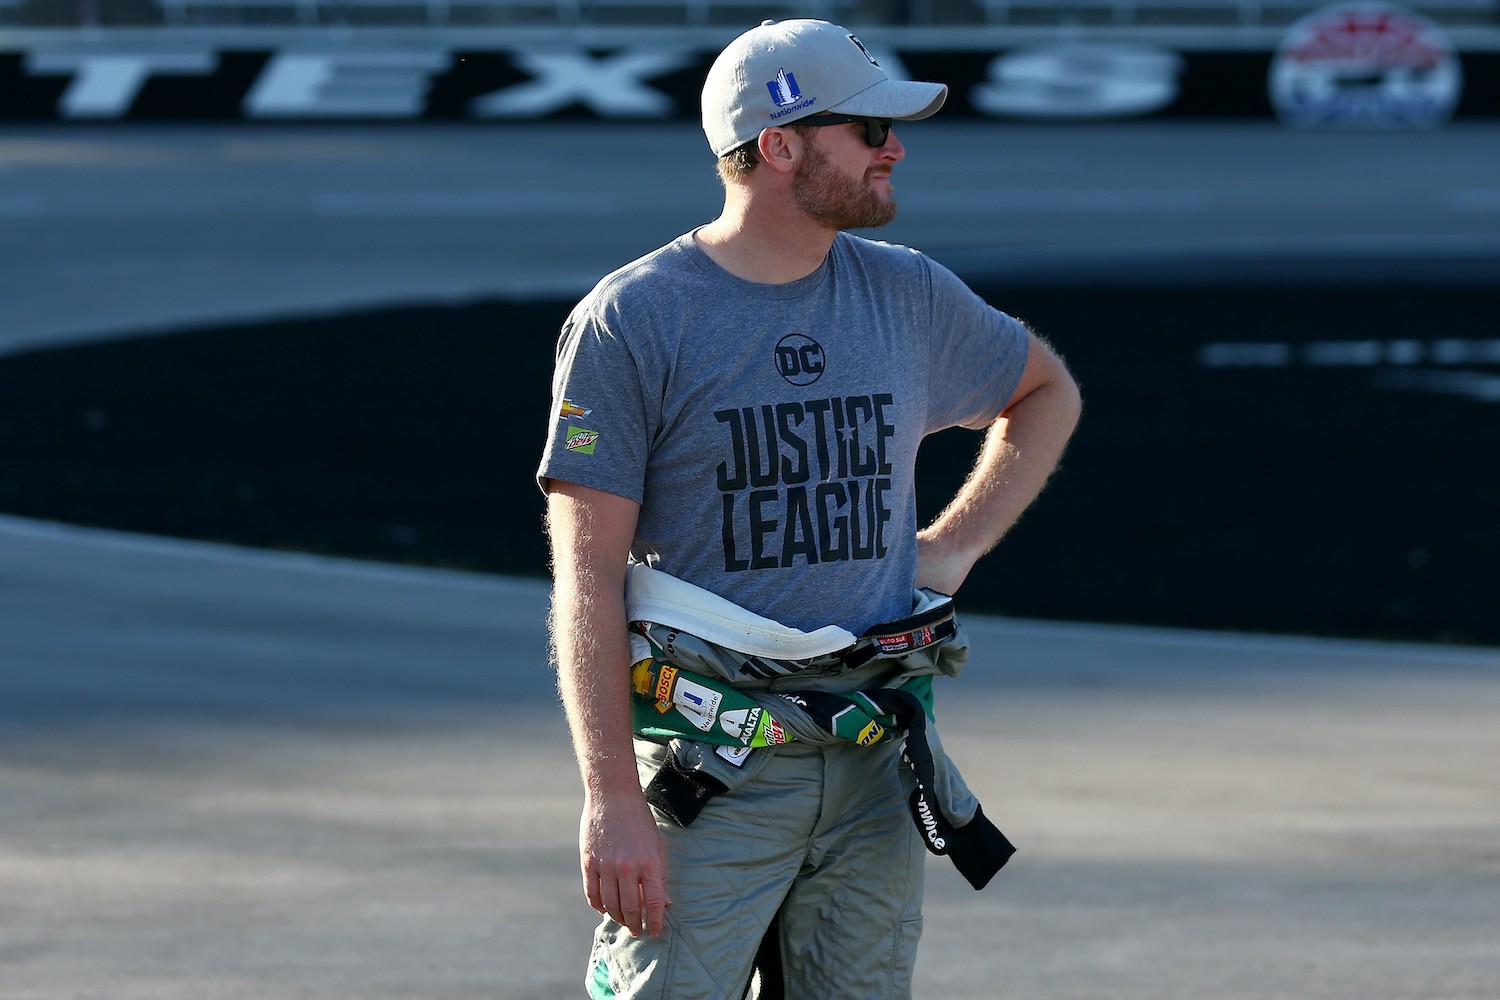 Dale Earnhardt Jr. looks on at Texas Motor Speedway during his final NASCAR season before retirement.